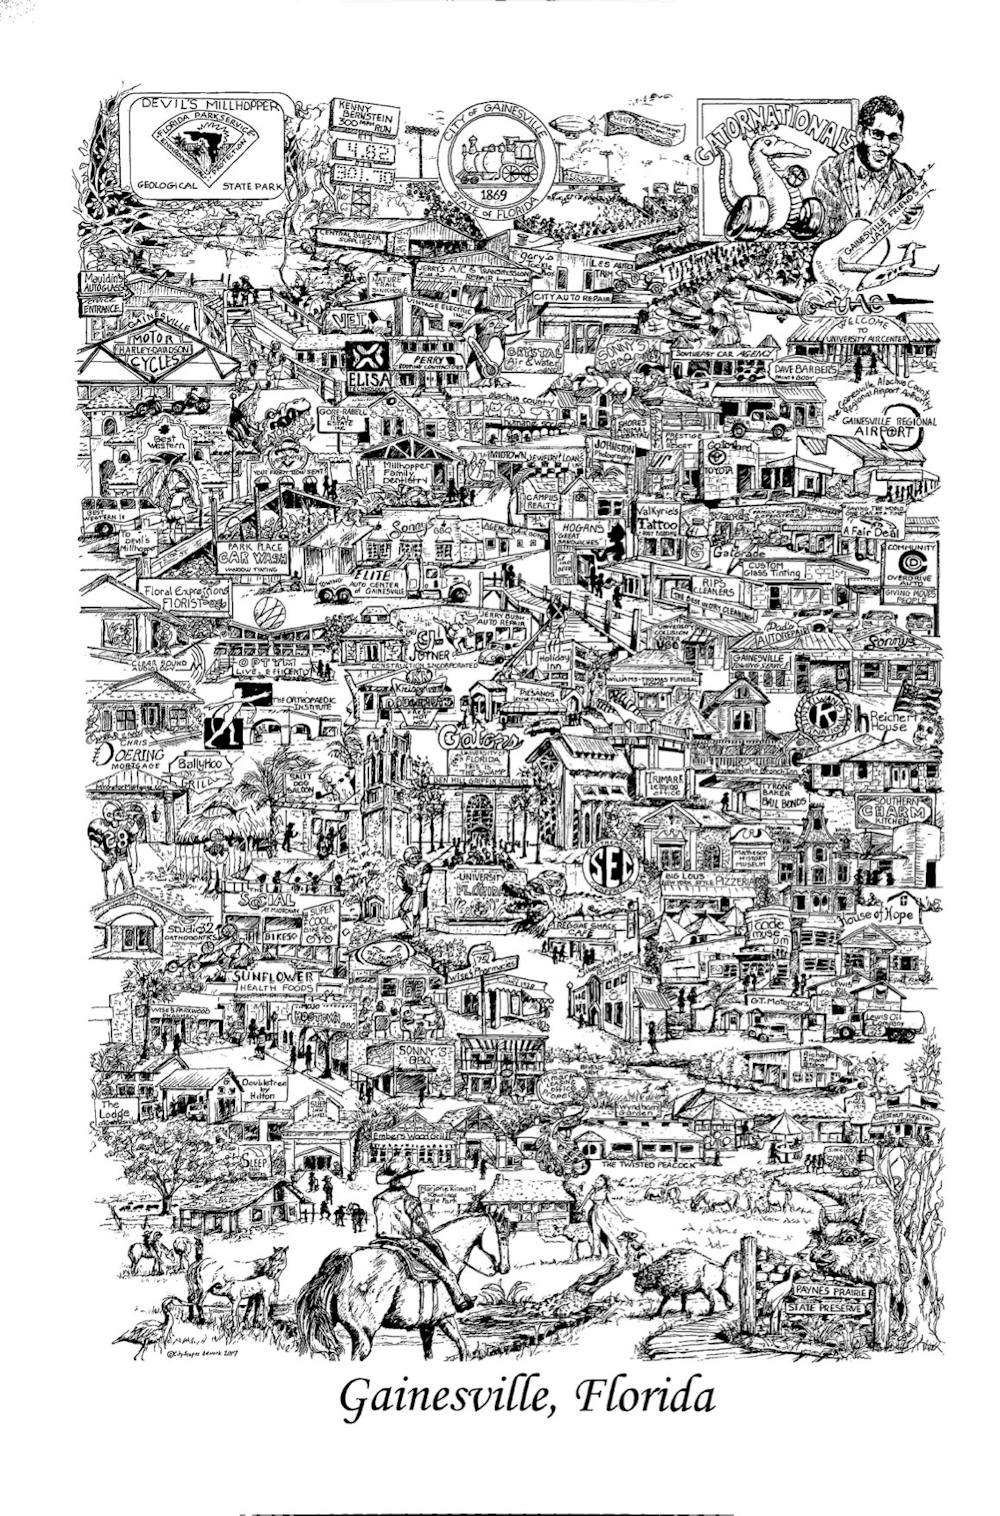 <p><span id="docs-internal-guid-f275bede-3344-d3ad-3d6a-7e3801d95e42"><span>Local organizations paired with CityScapes Artwork to create a hand-drawn print that depicts well-known businesses, restaurants and landmarks in the area. The artwork will be sold to benefit nonprofit organizations in Gainesville.</span></span></p>